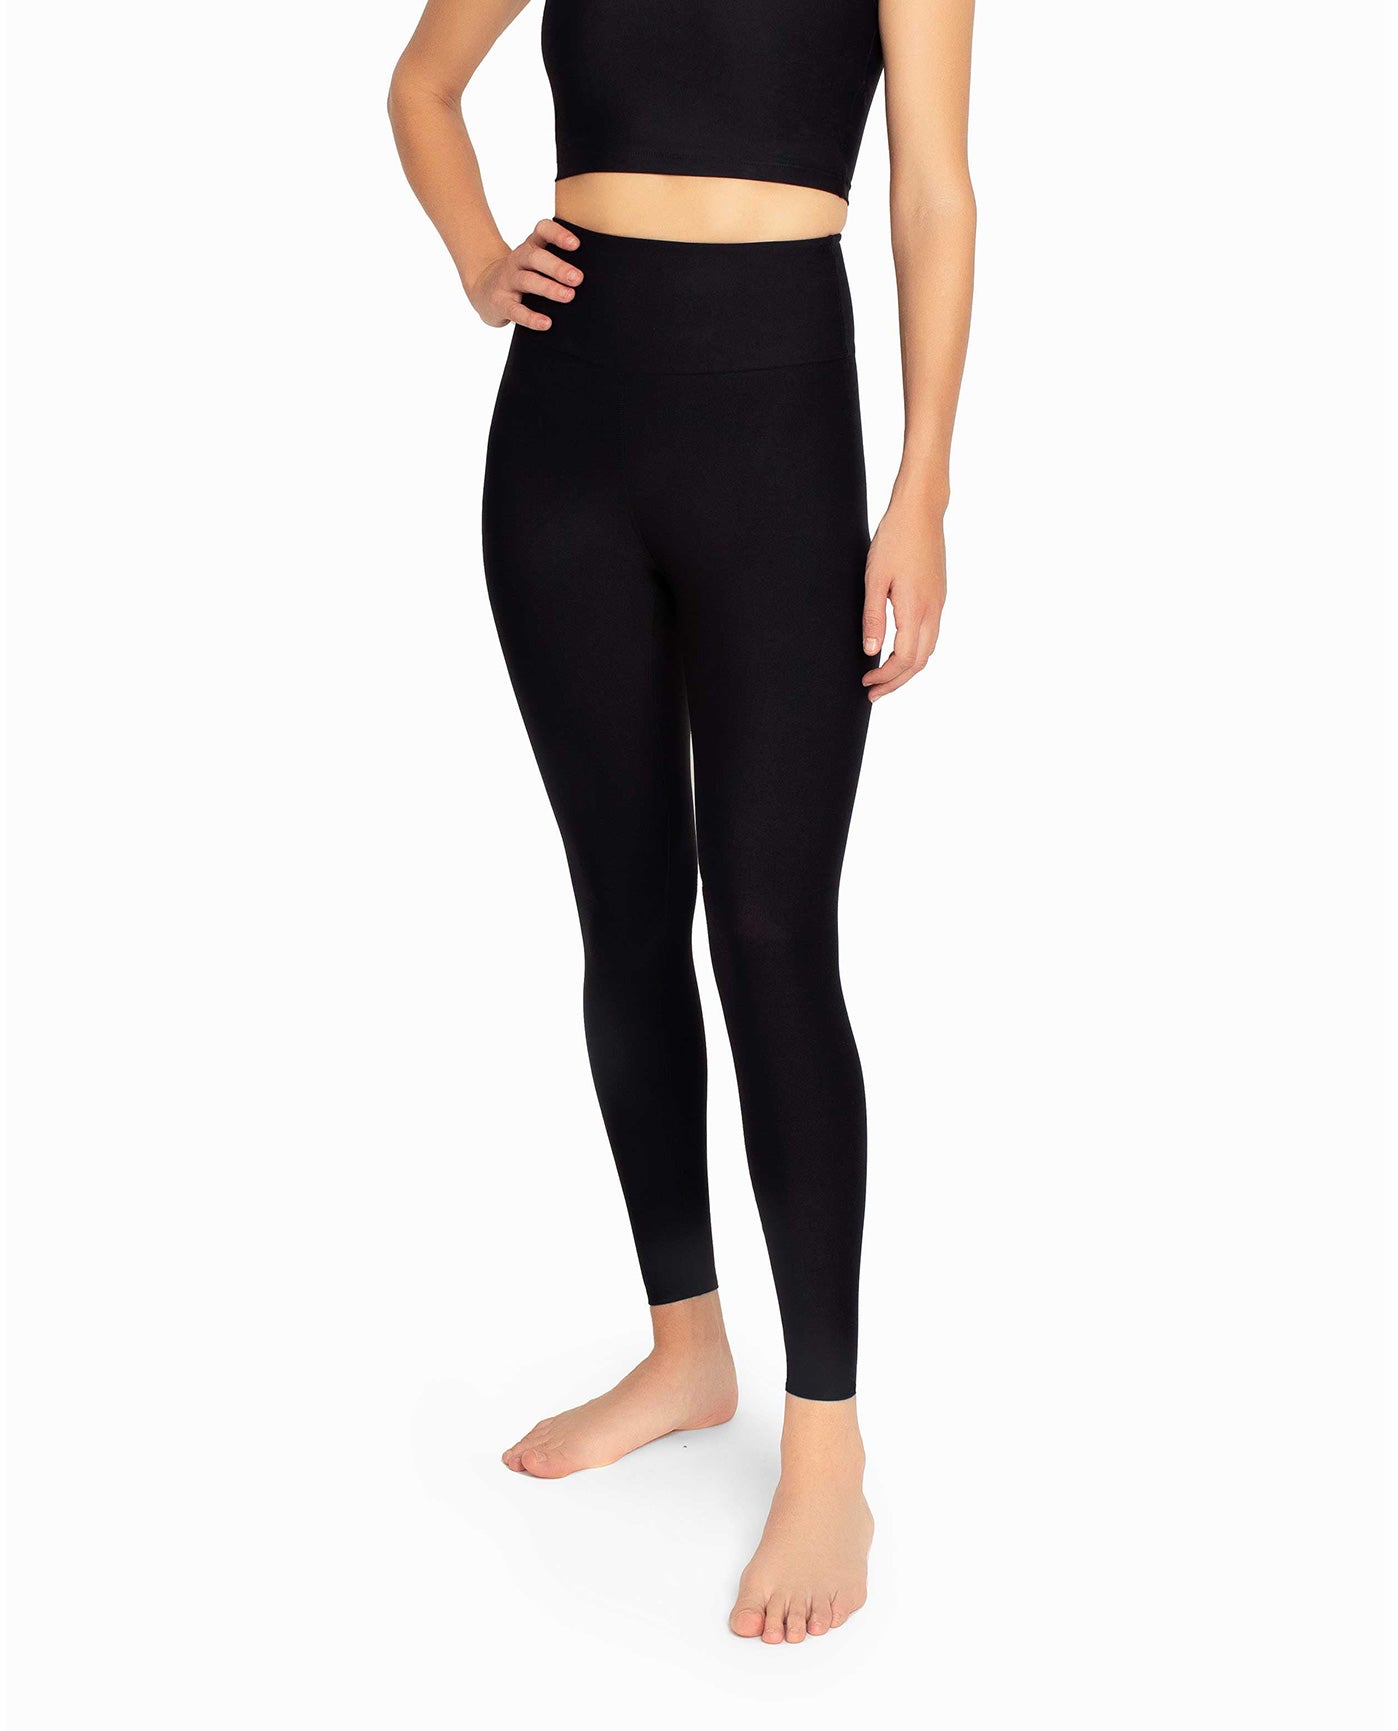 Nicole Miller fleece lined footless tights for $5, free shipping - Clark  Deals